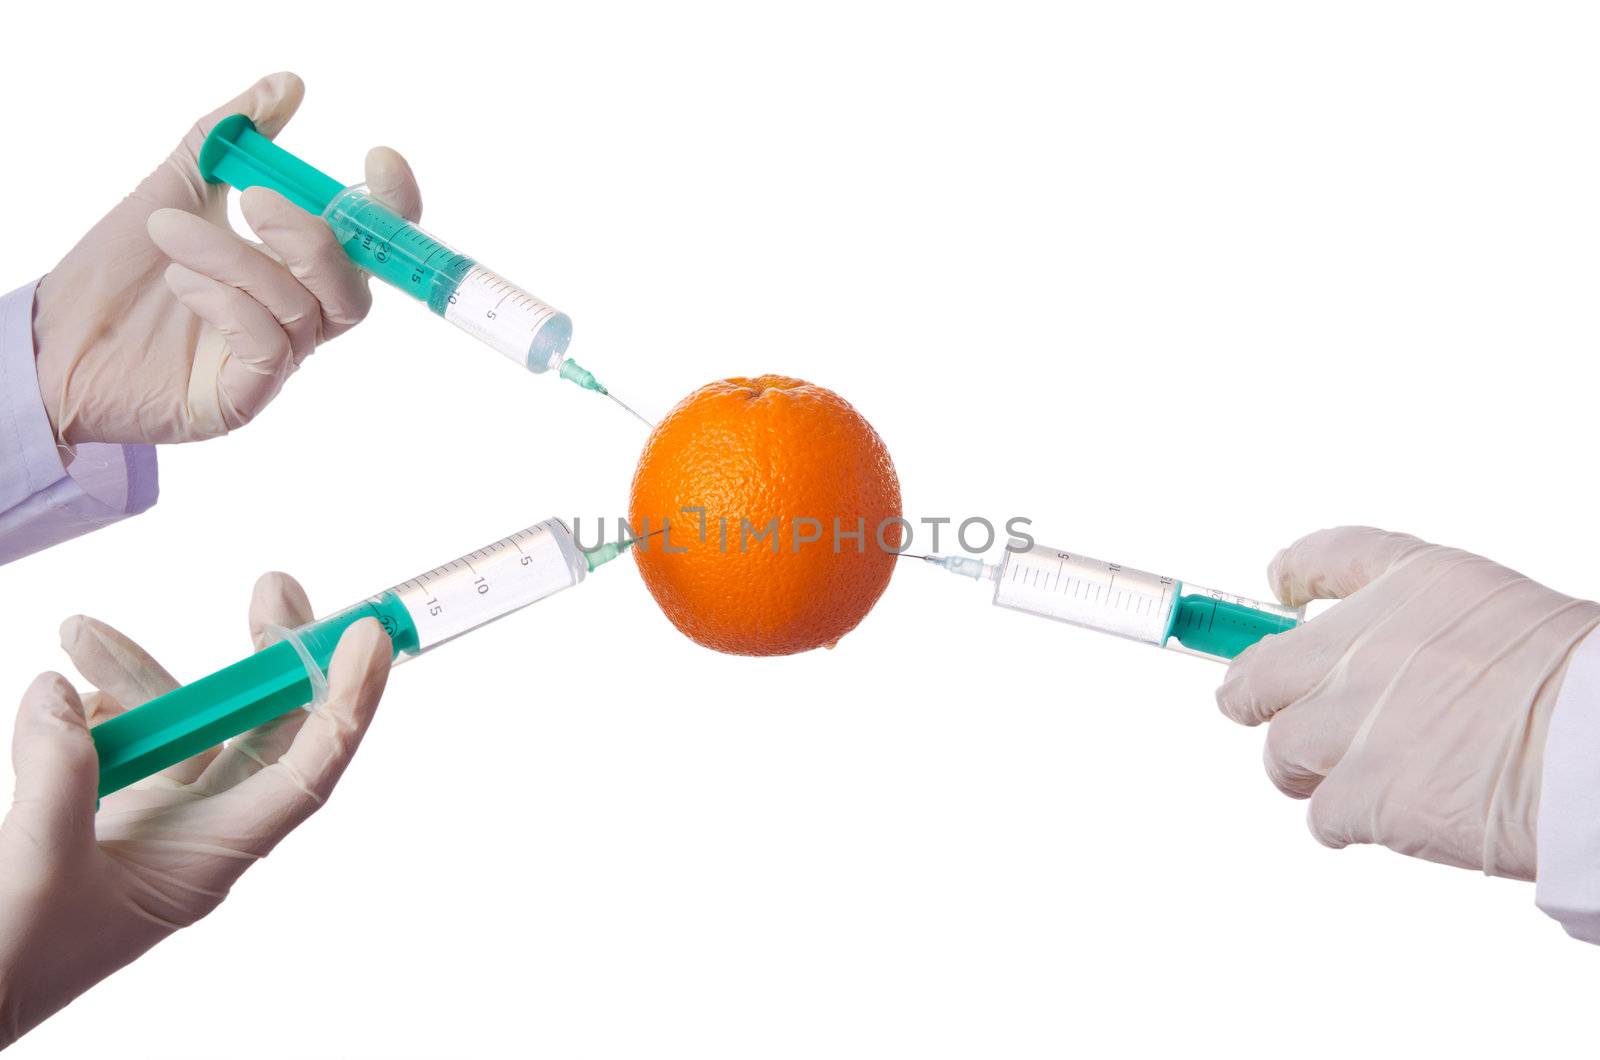 Science experiment with orange and syringe by Elnur